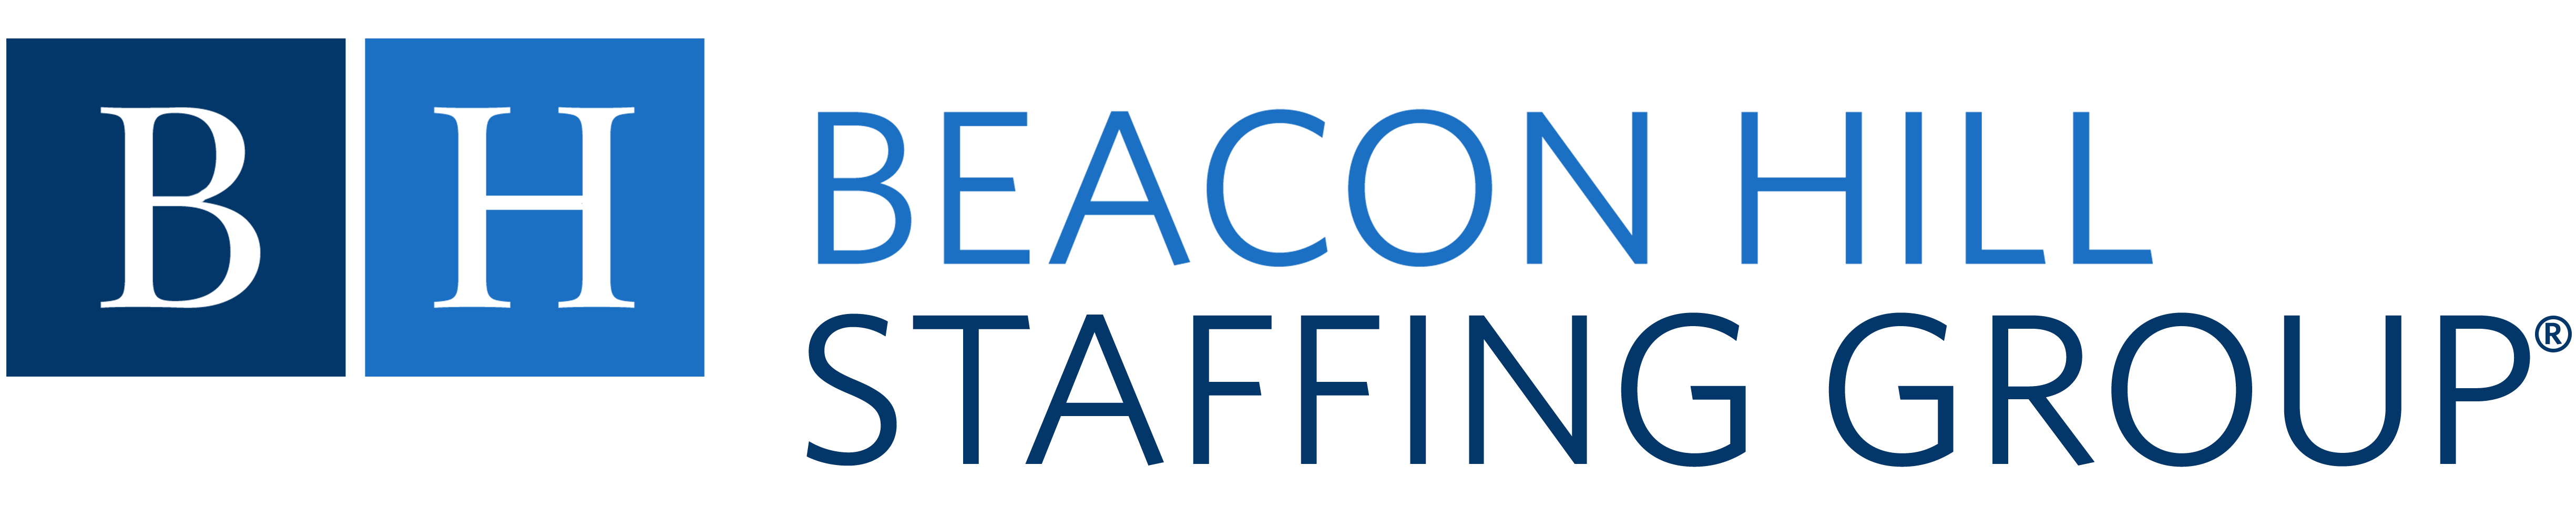 Beacon Hill Staffing Group logo linked to website.